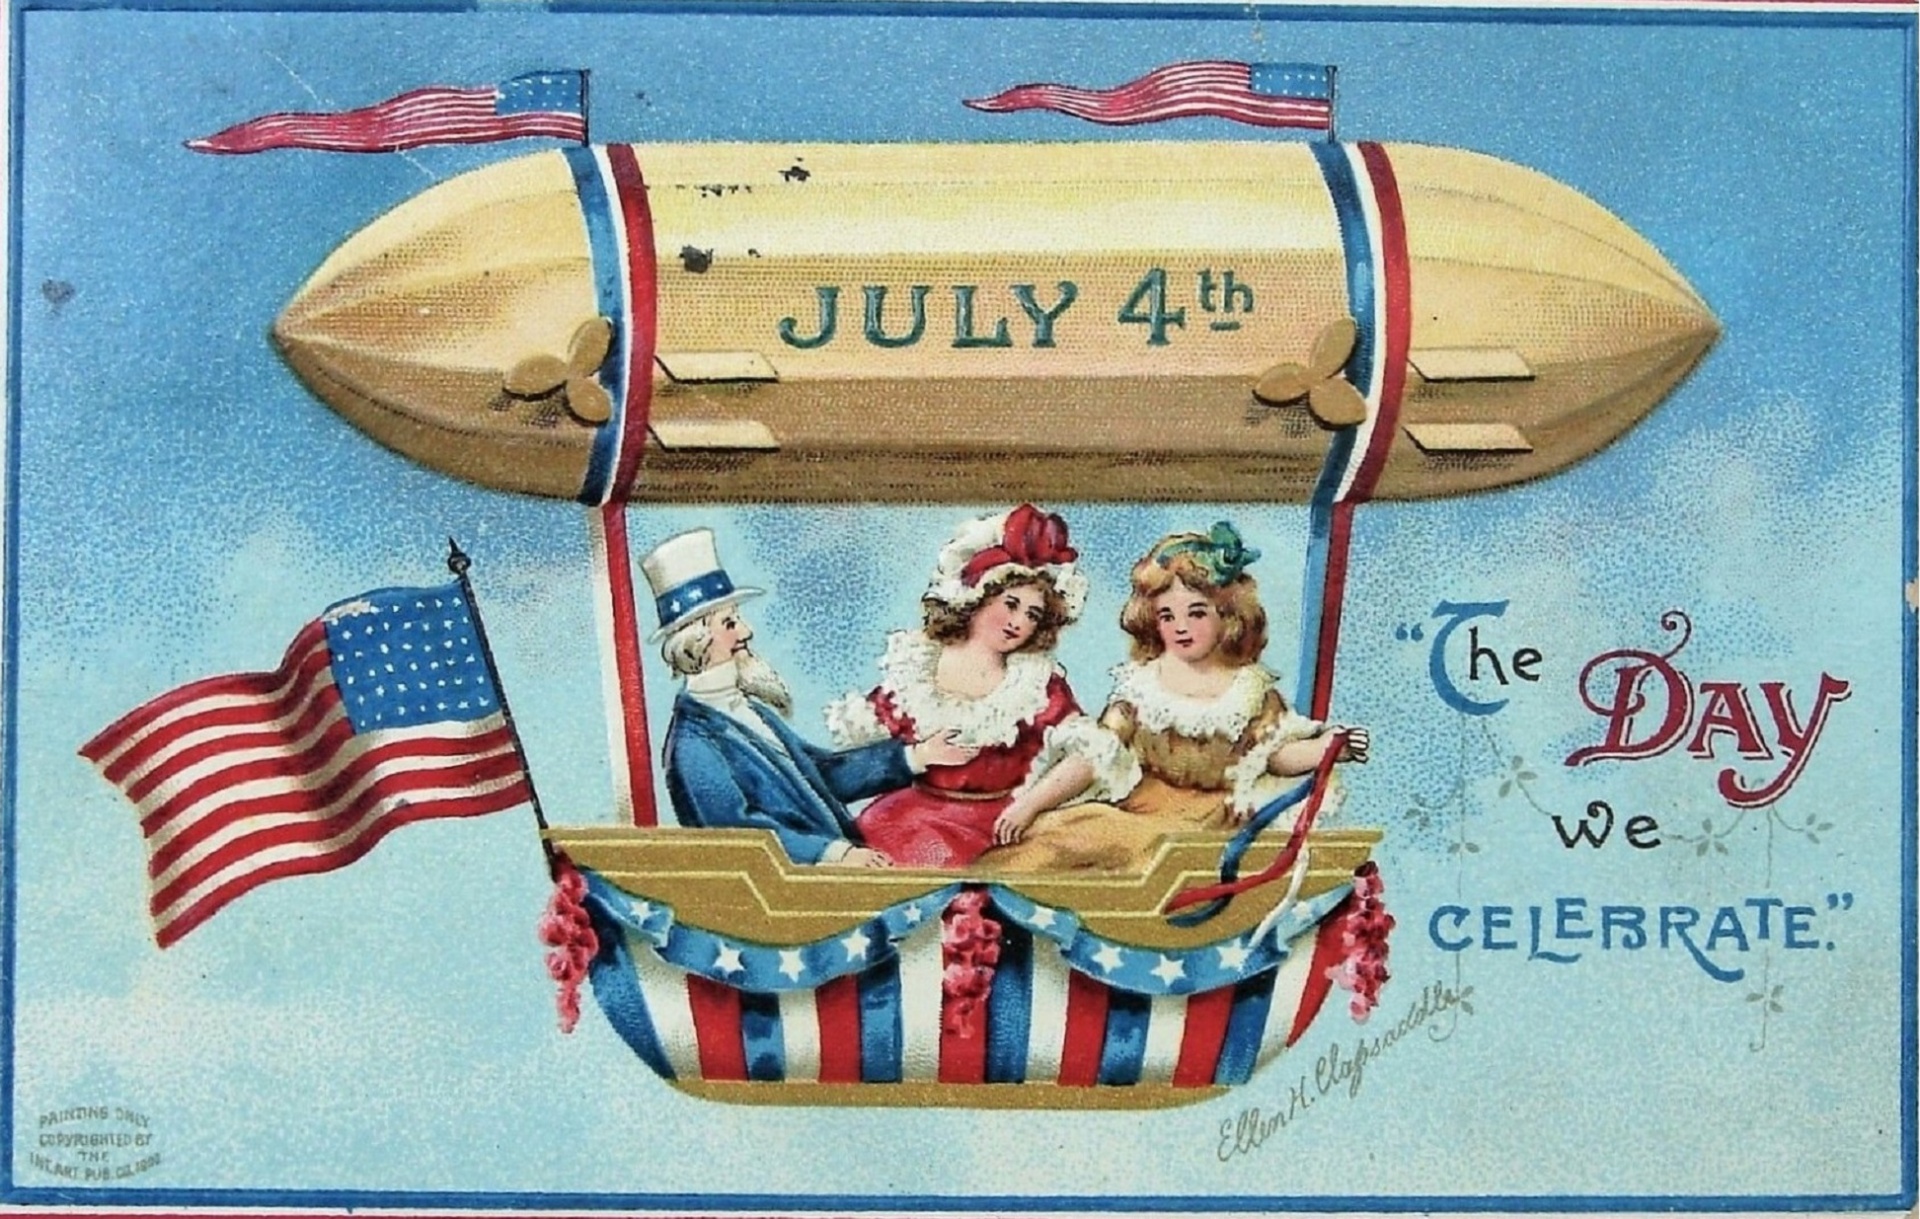 The Day We Celebrate July 4th